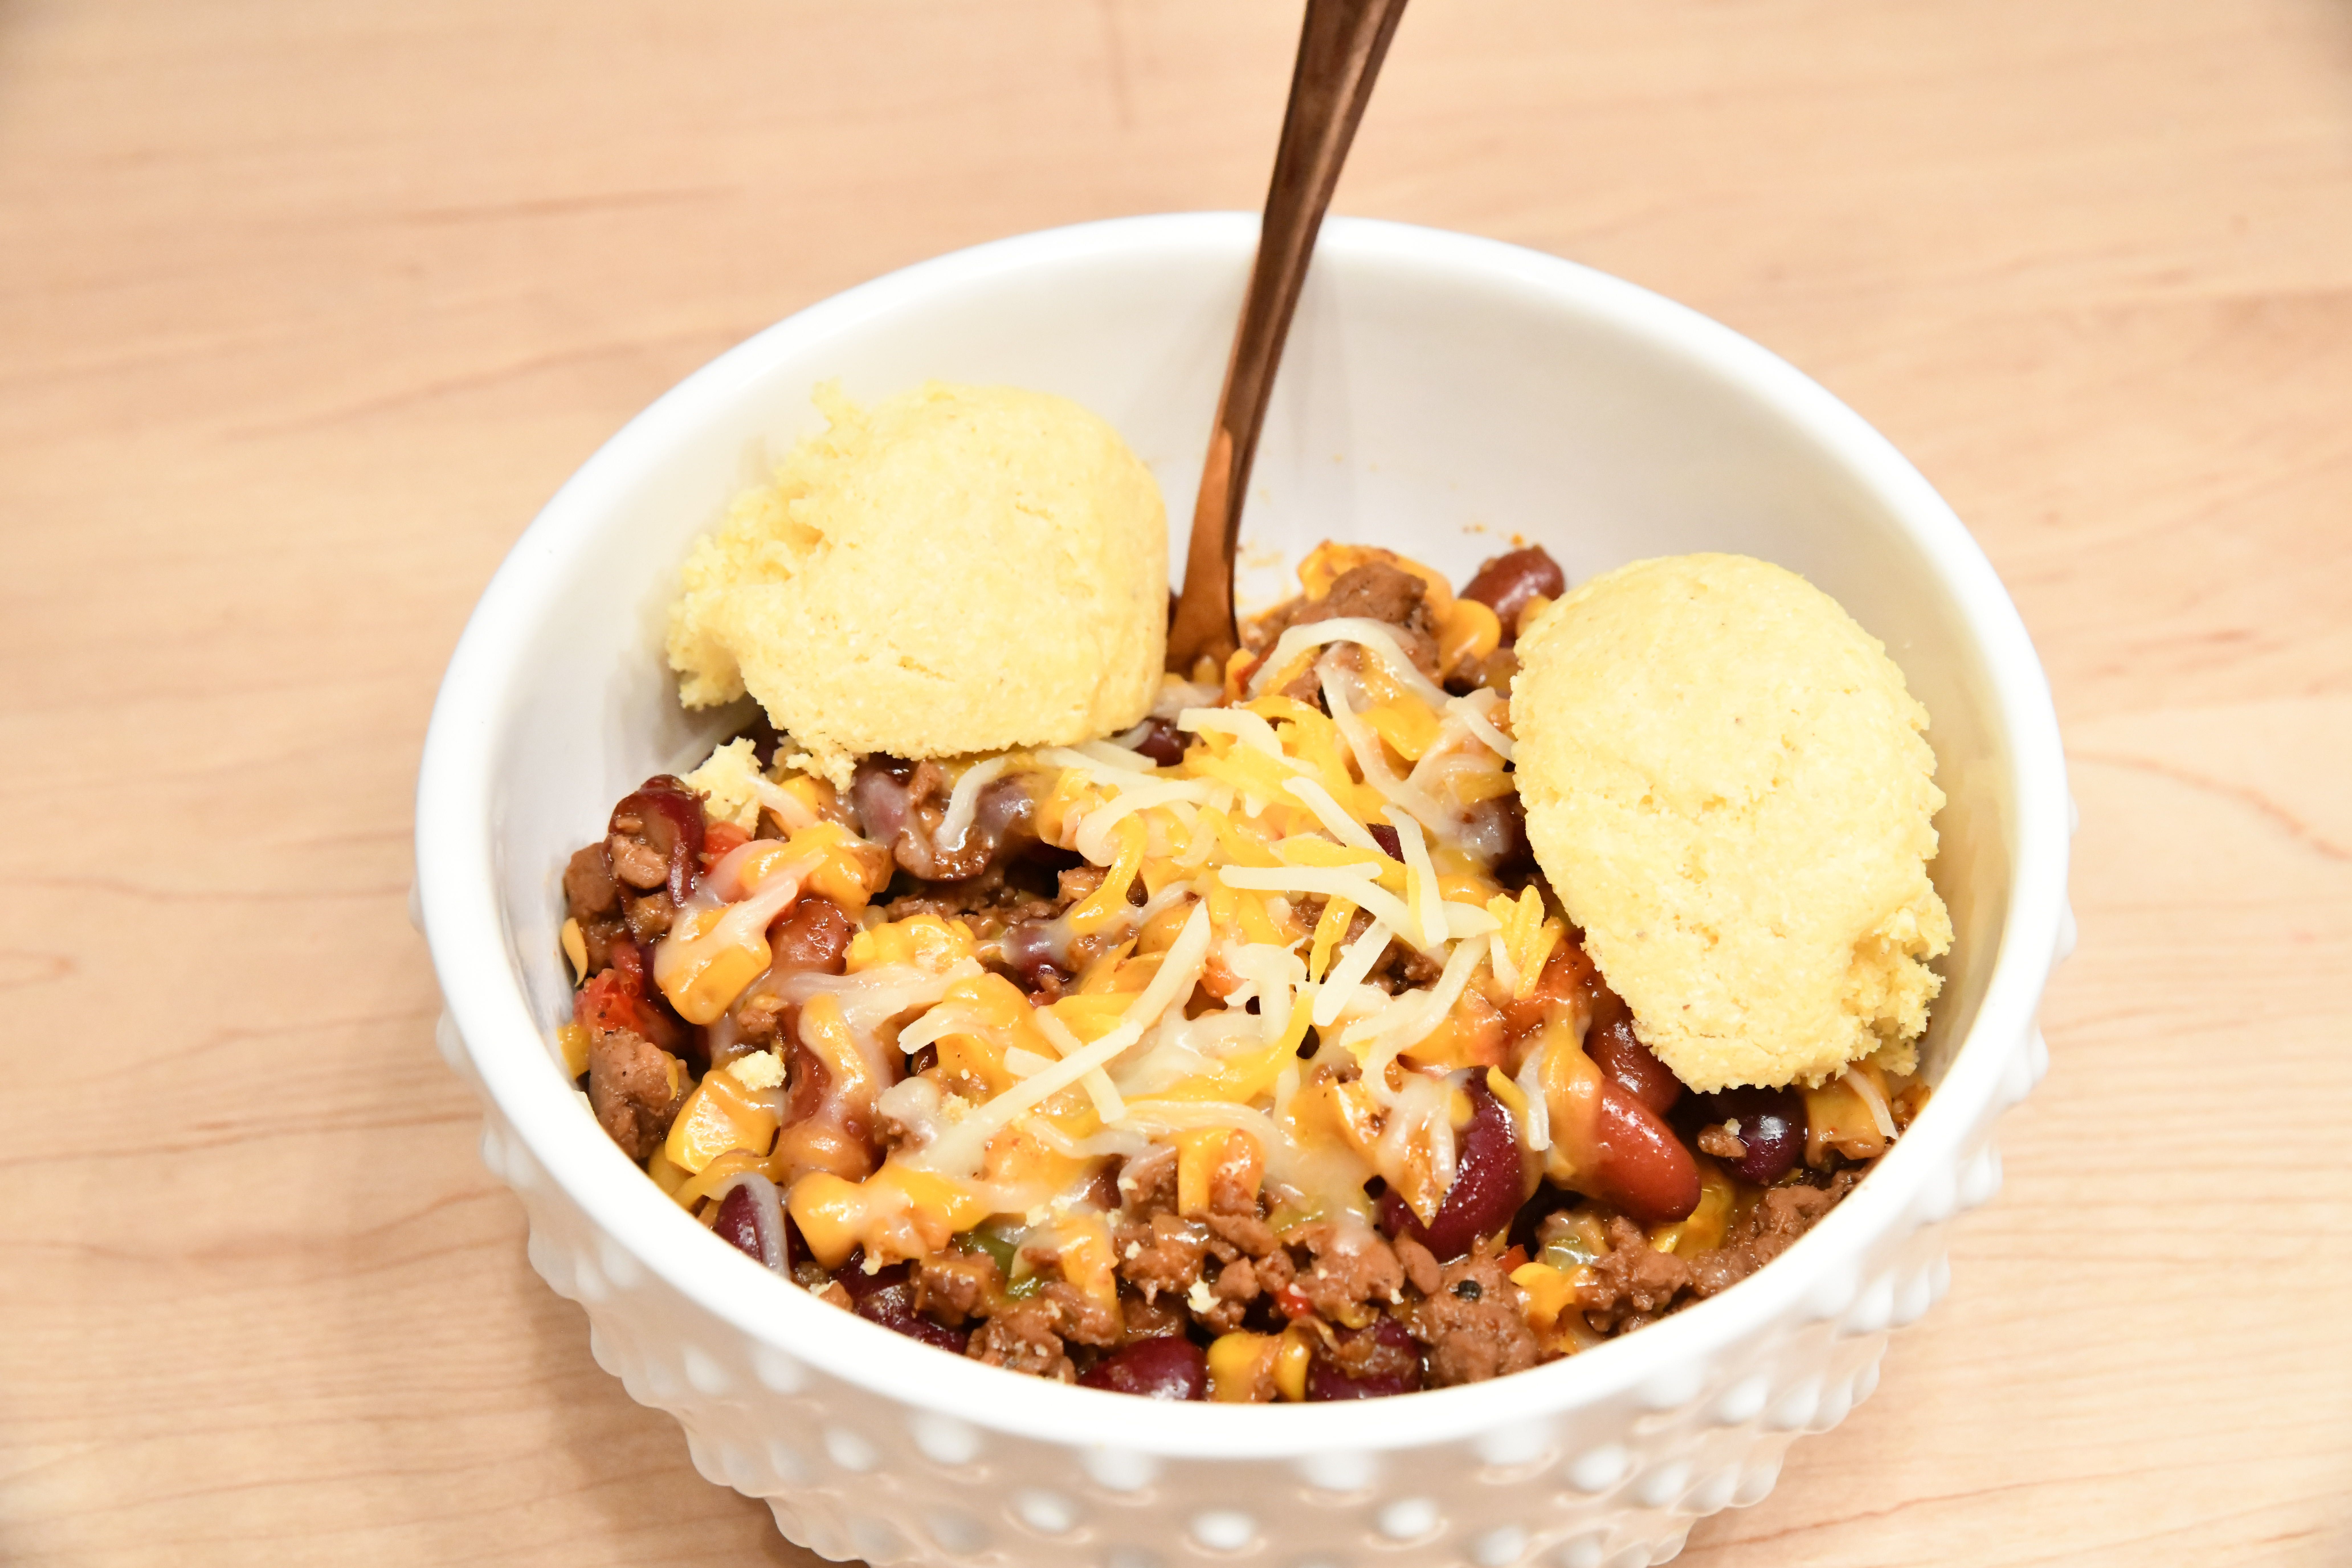 Chili with cheese and cornbread in a bowl on the counter